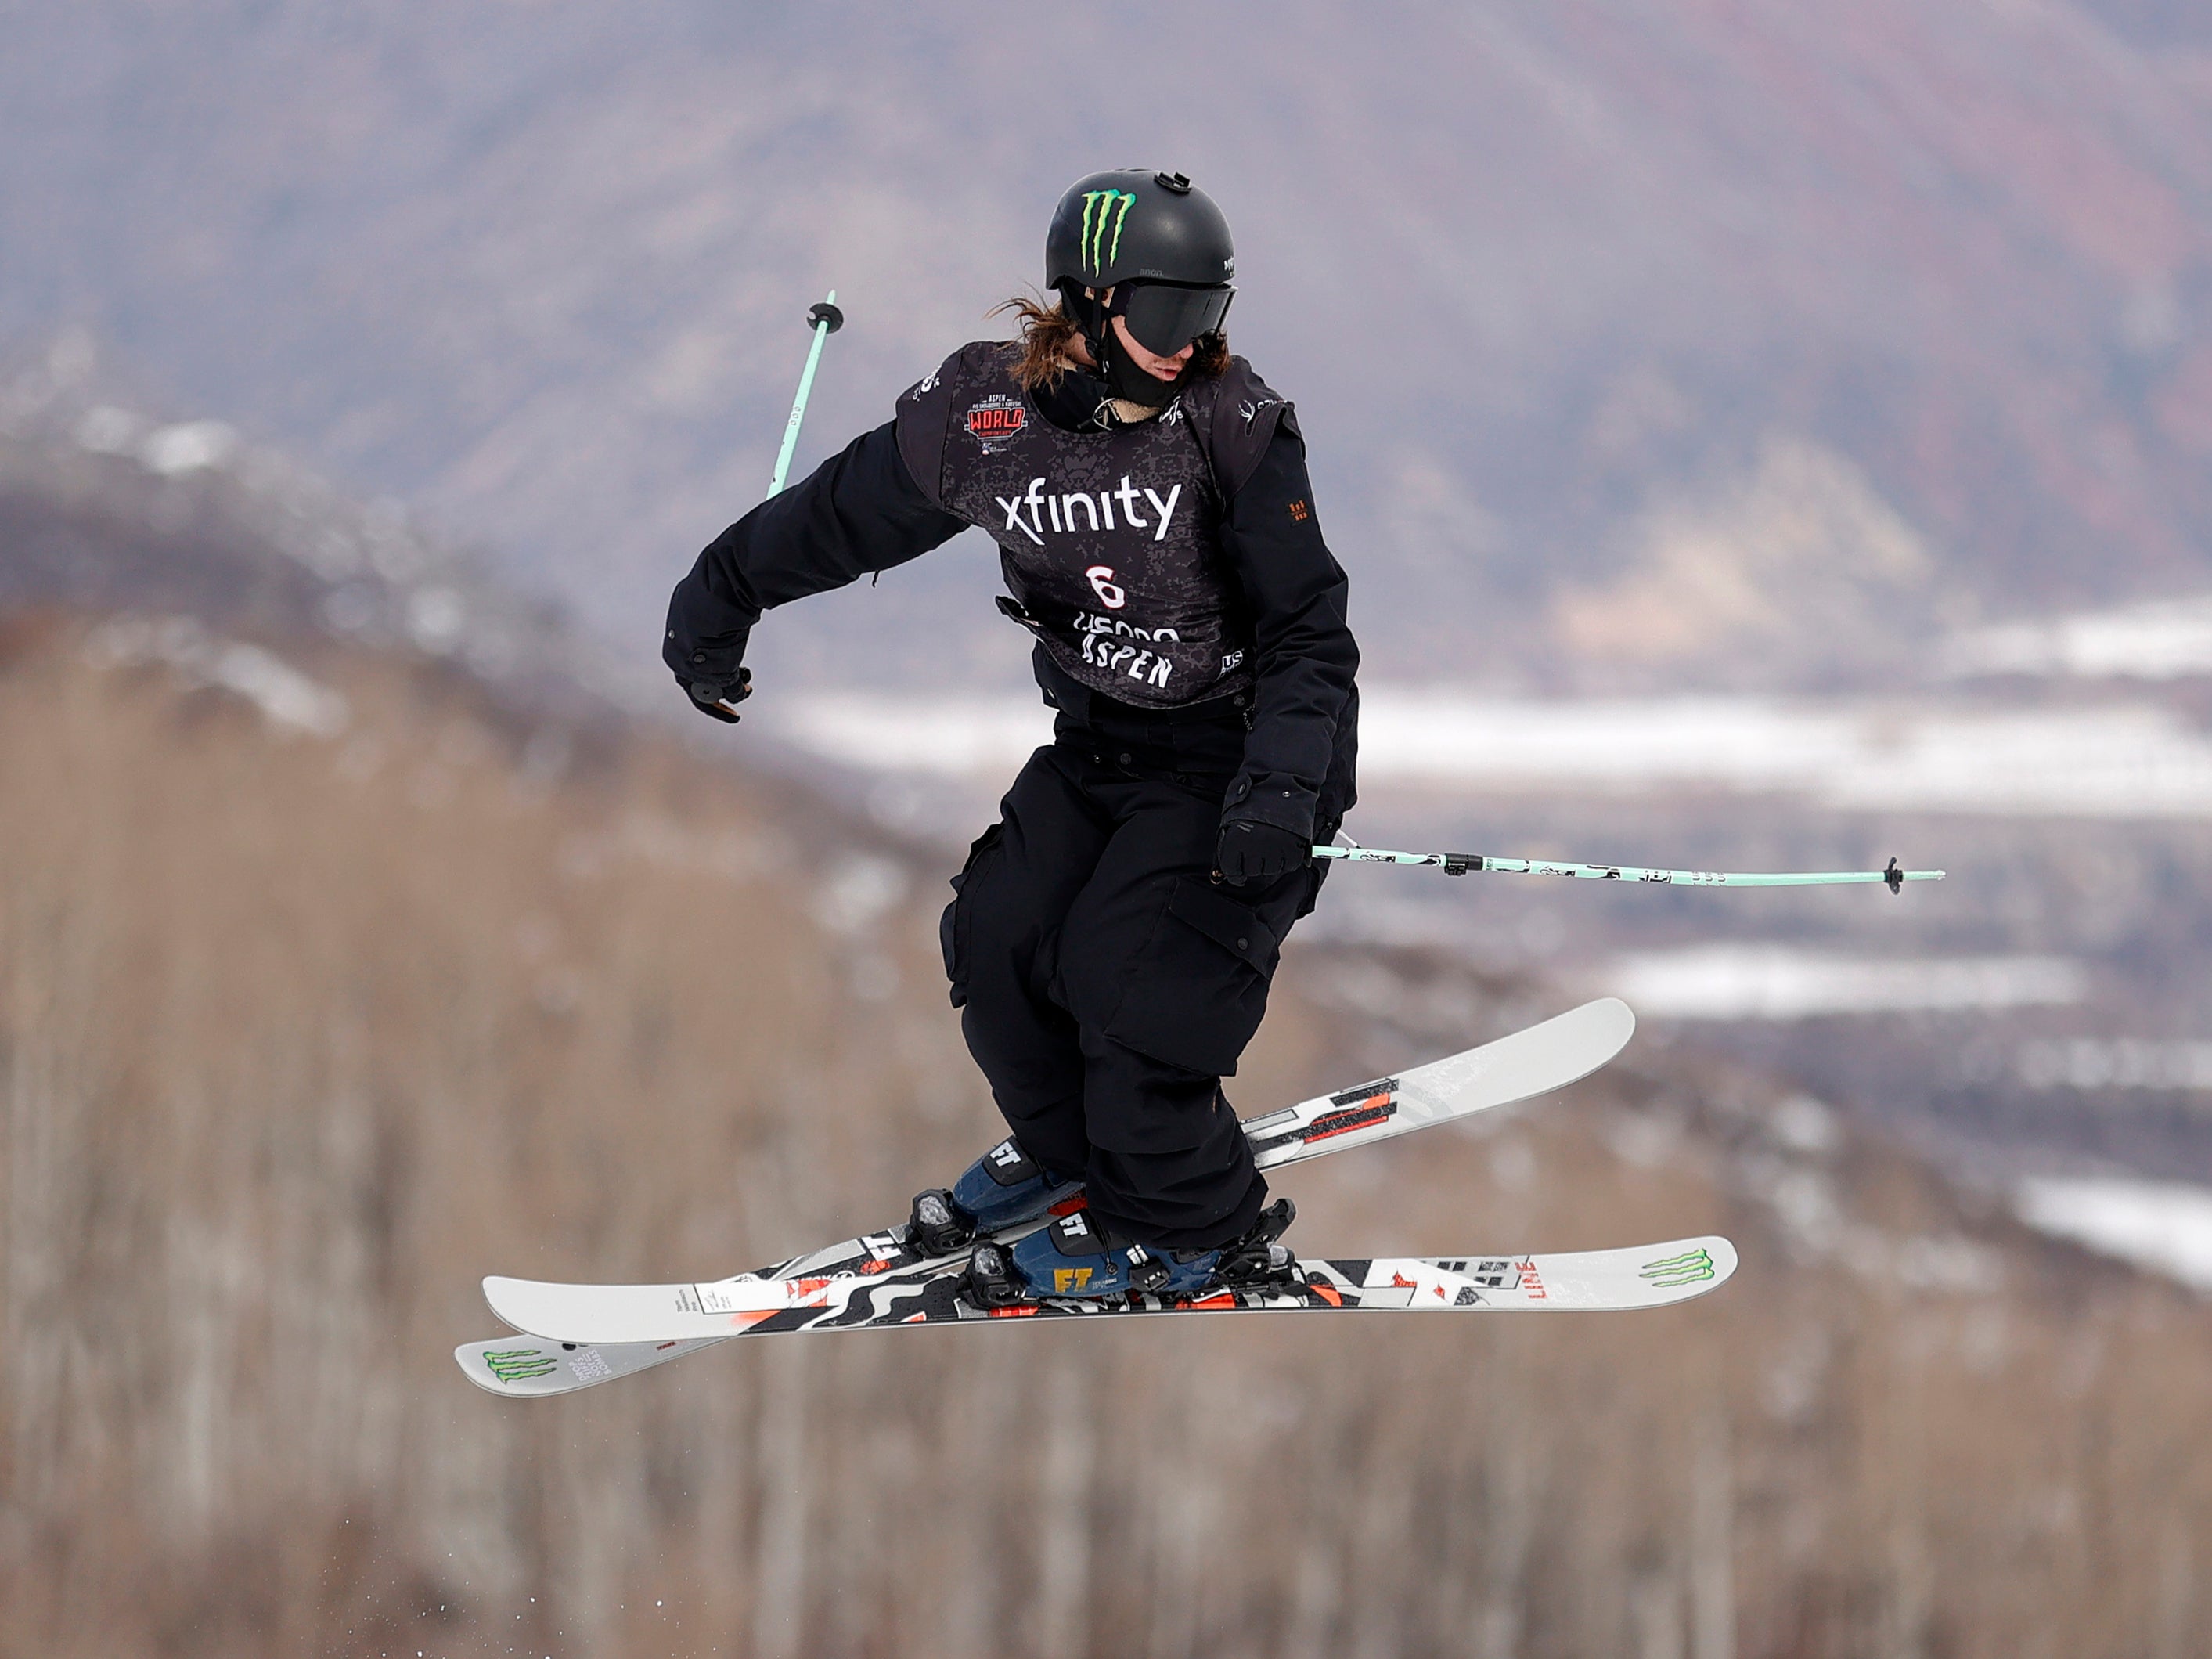 James Woods in action at the Snowboard and Freeski World Championship